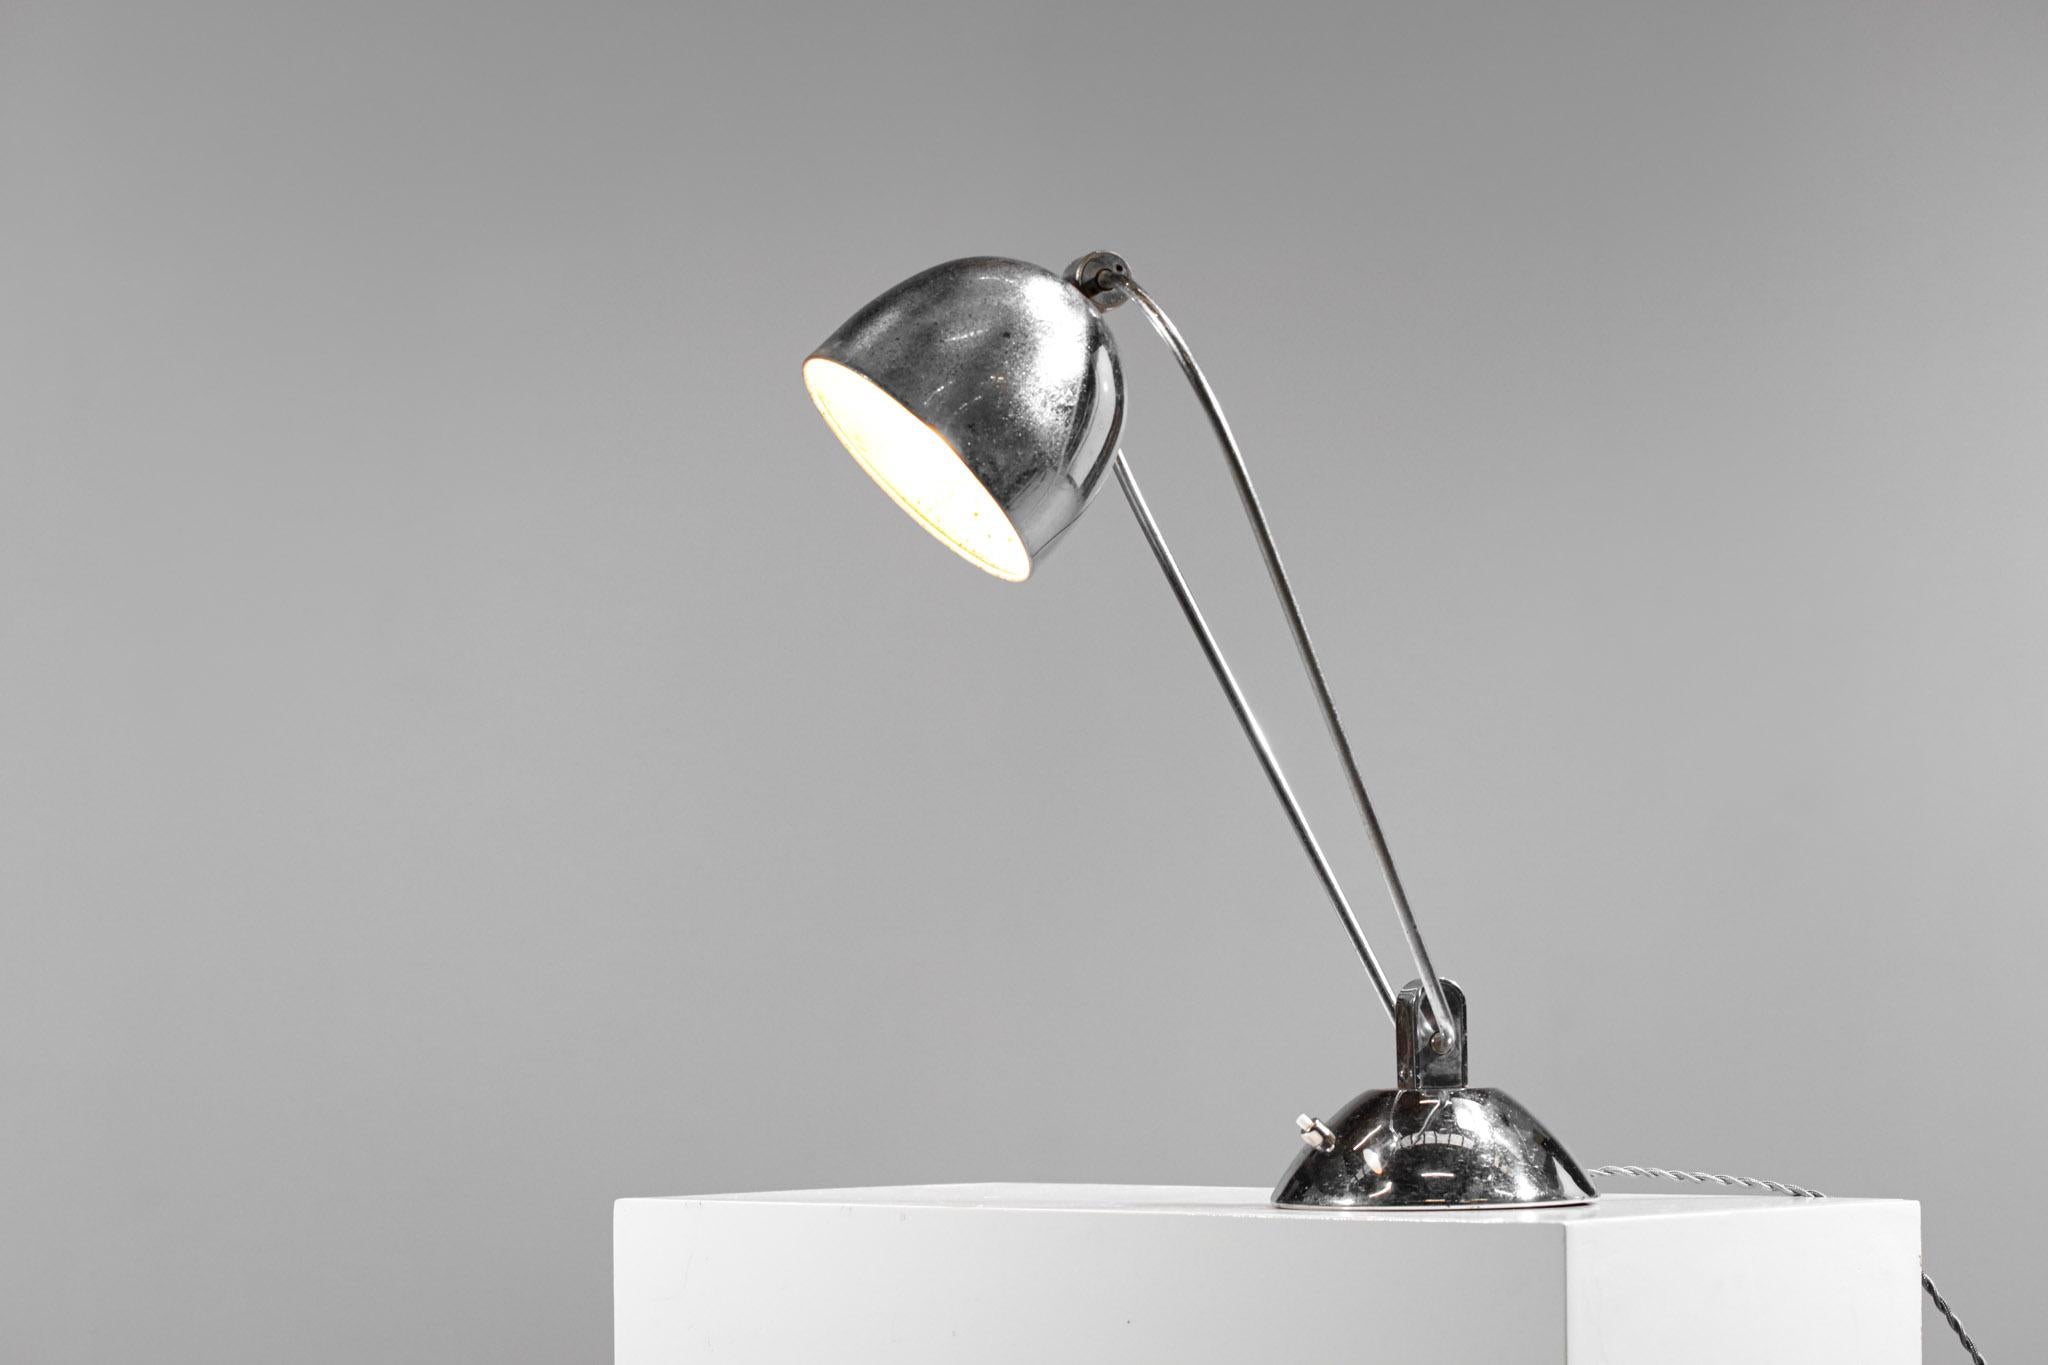 Polychromed French Modernist Art Deco Chrome Table Lamp in Style of Maison Desny, 1950 F397 For Sale